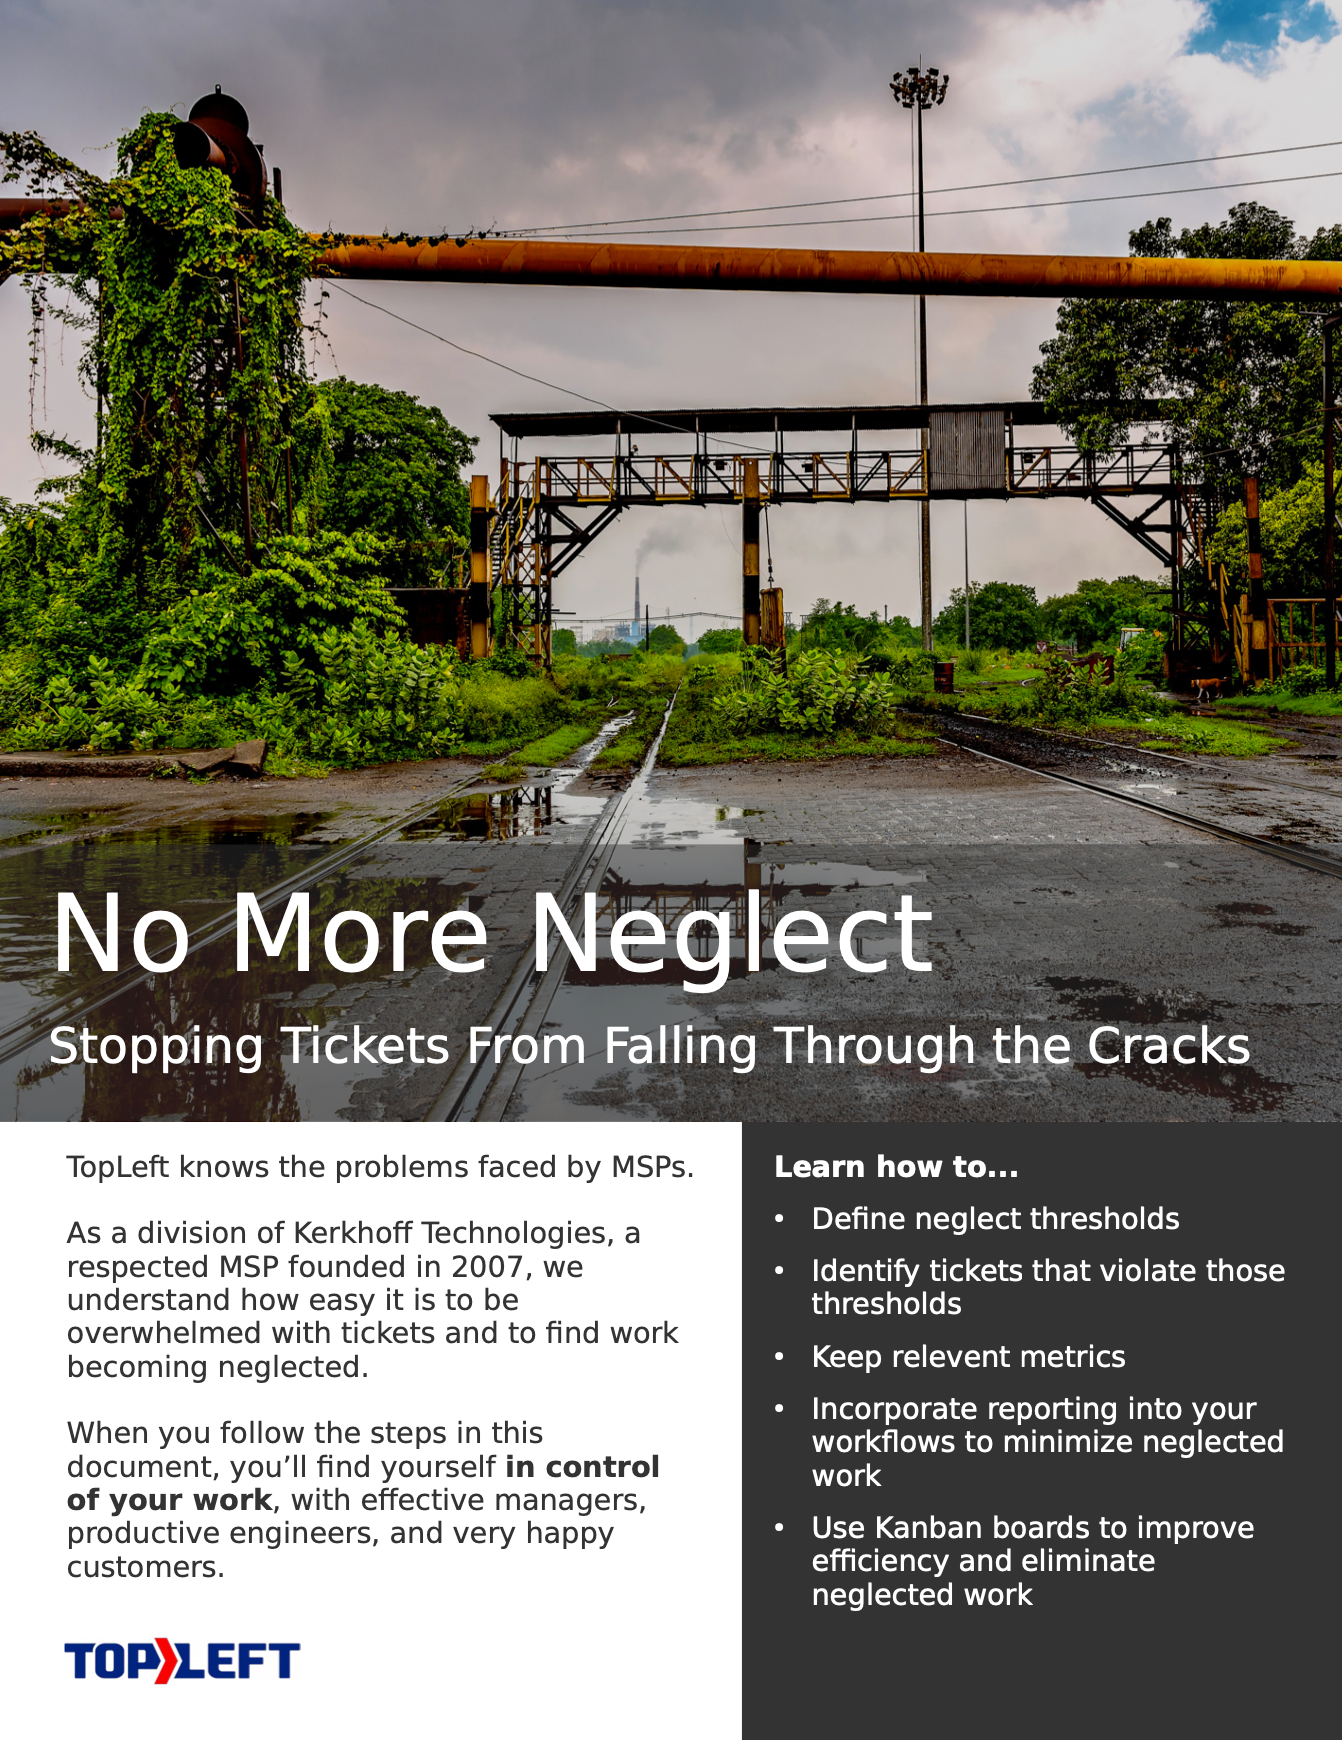 Stop Tickets From Falling Between the Cracks